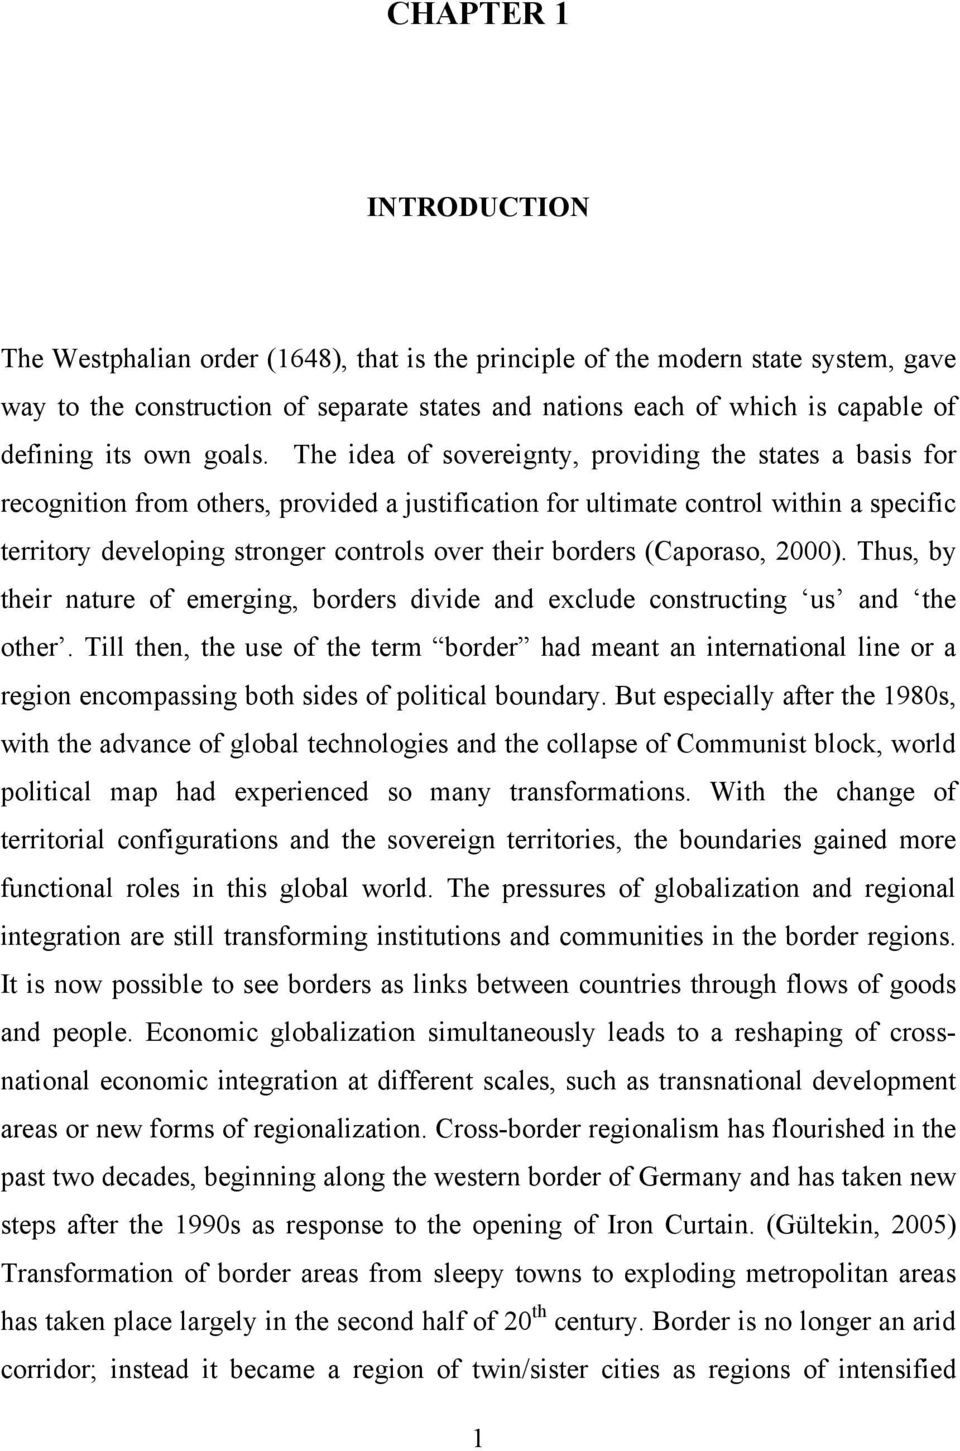 The idea of sovereignty, providing the states a basis for recognition from others, provided a justification for ultimate control within a specific territory developing stronger controls over their